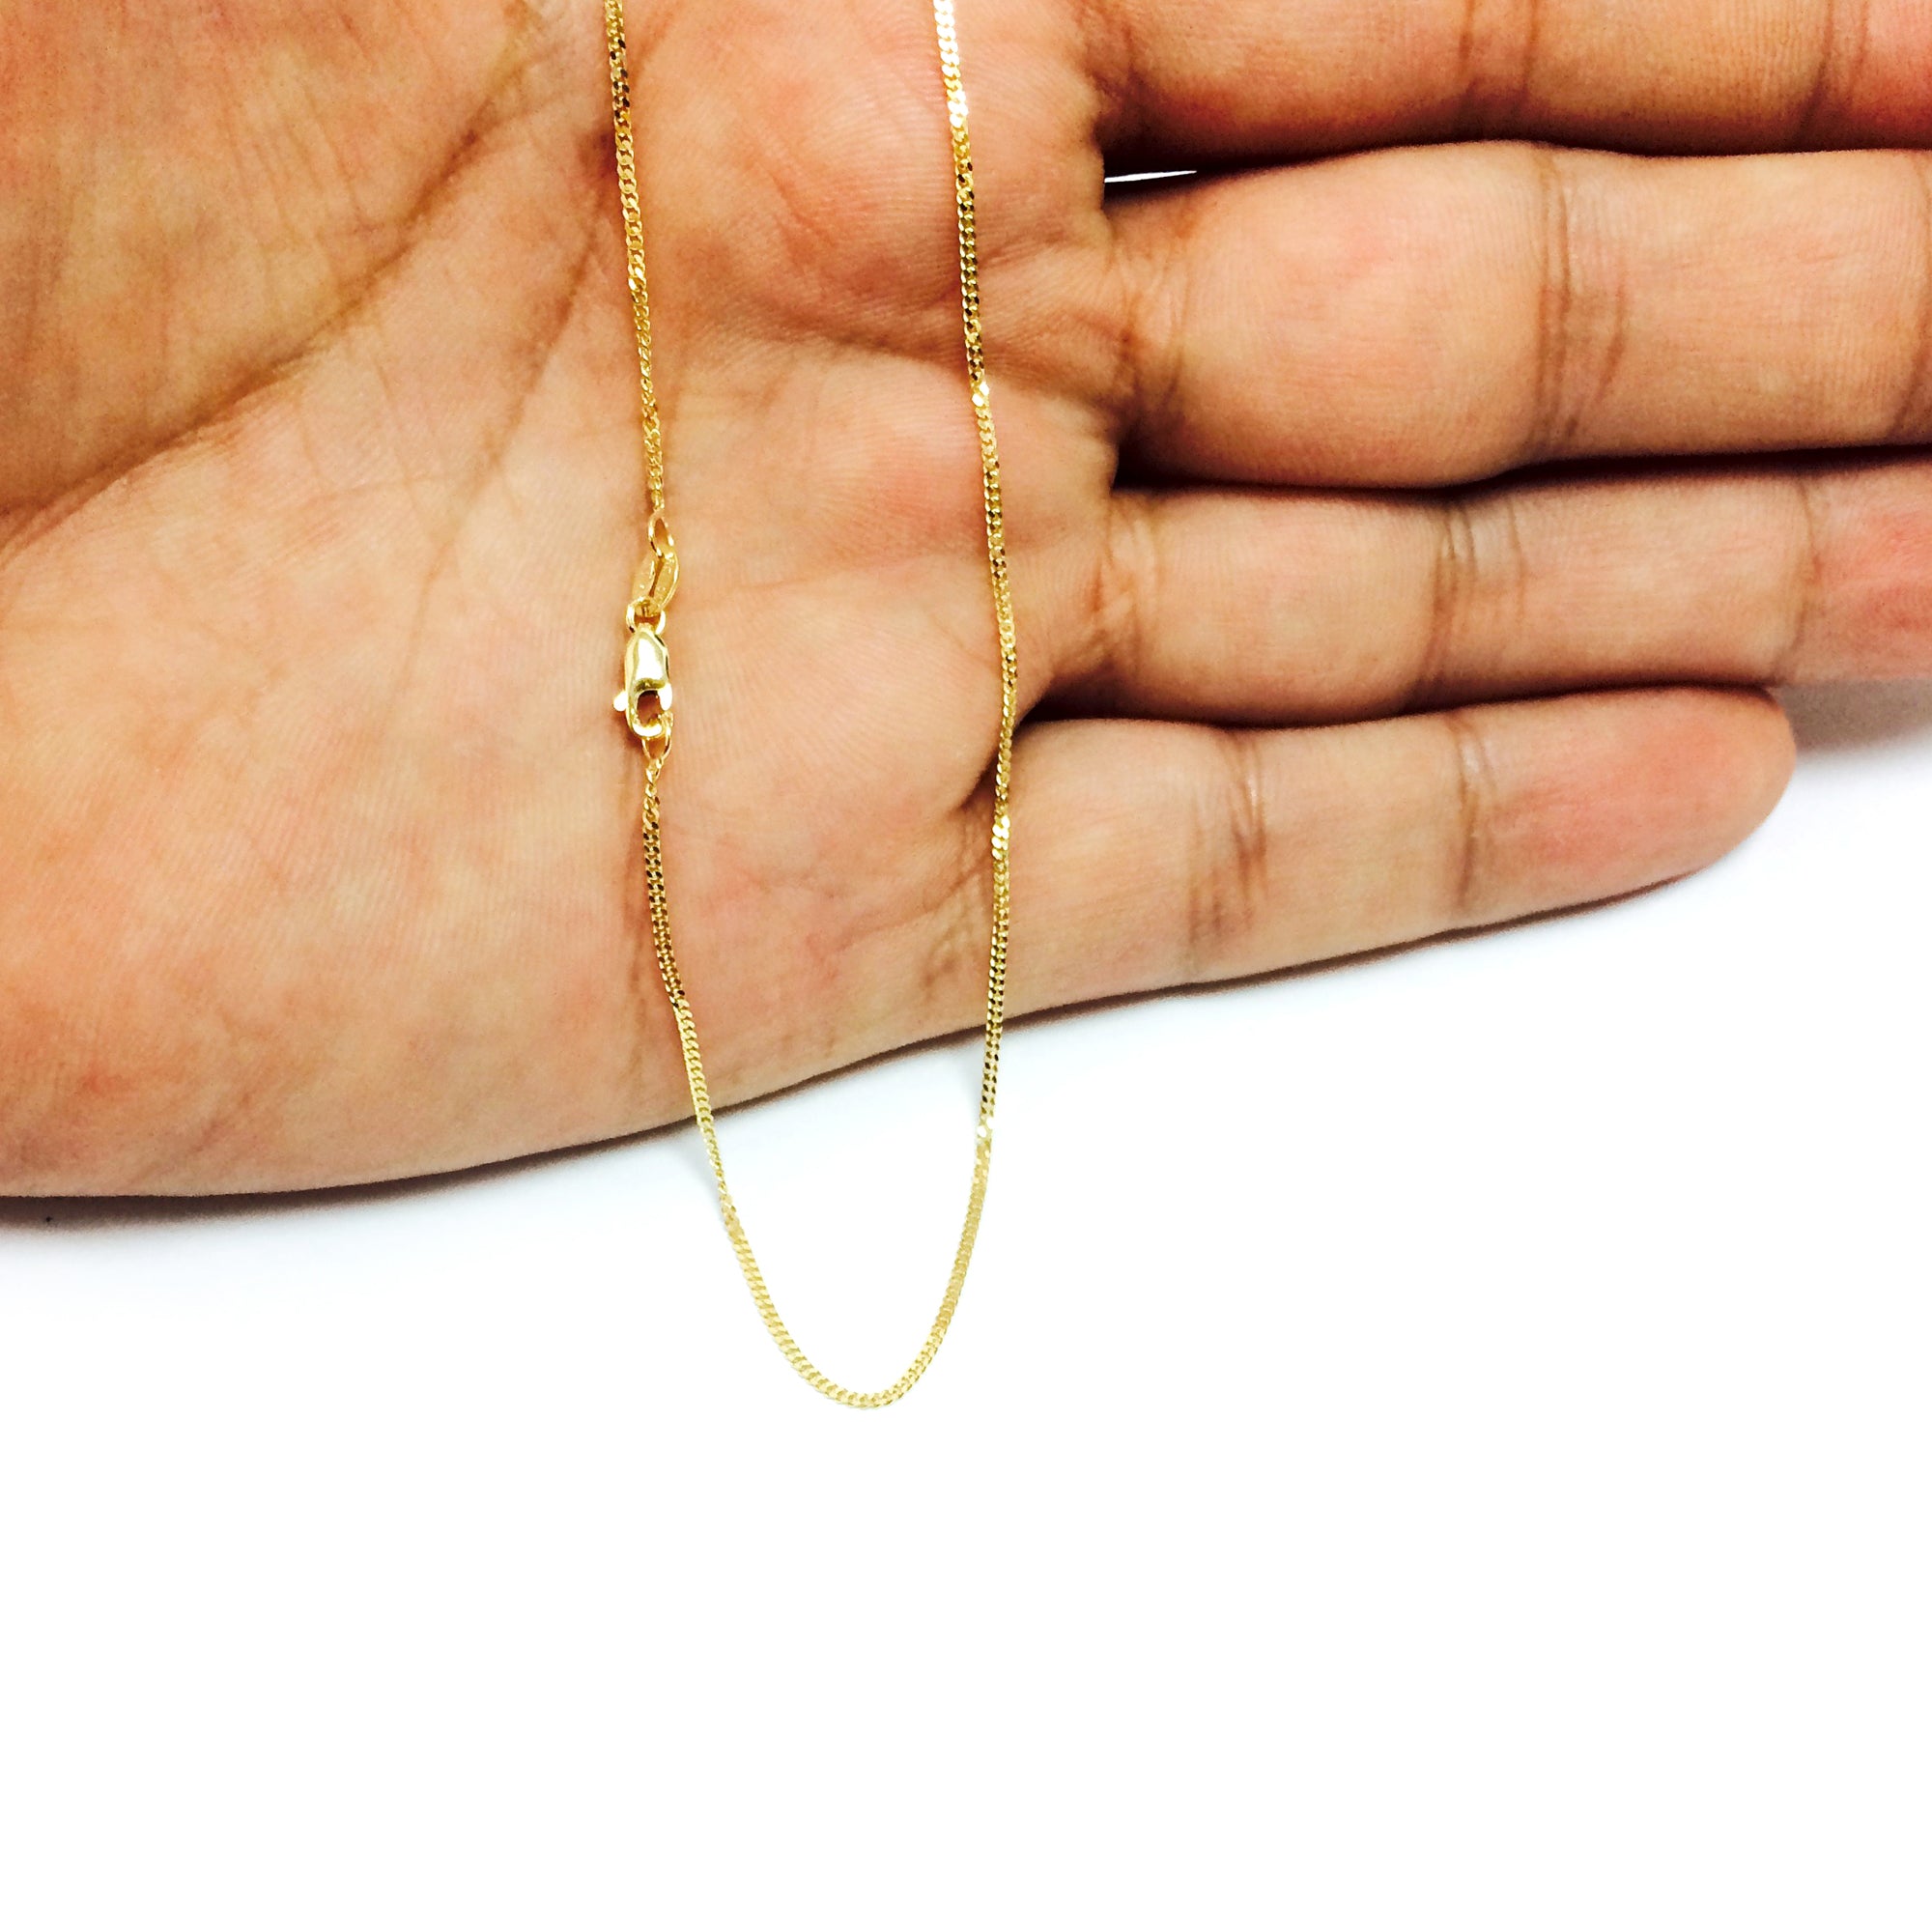 10k Yellow Gold Gourmette Chain Necklace, 1.0mm fine designer jewelry for men and women